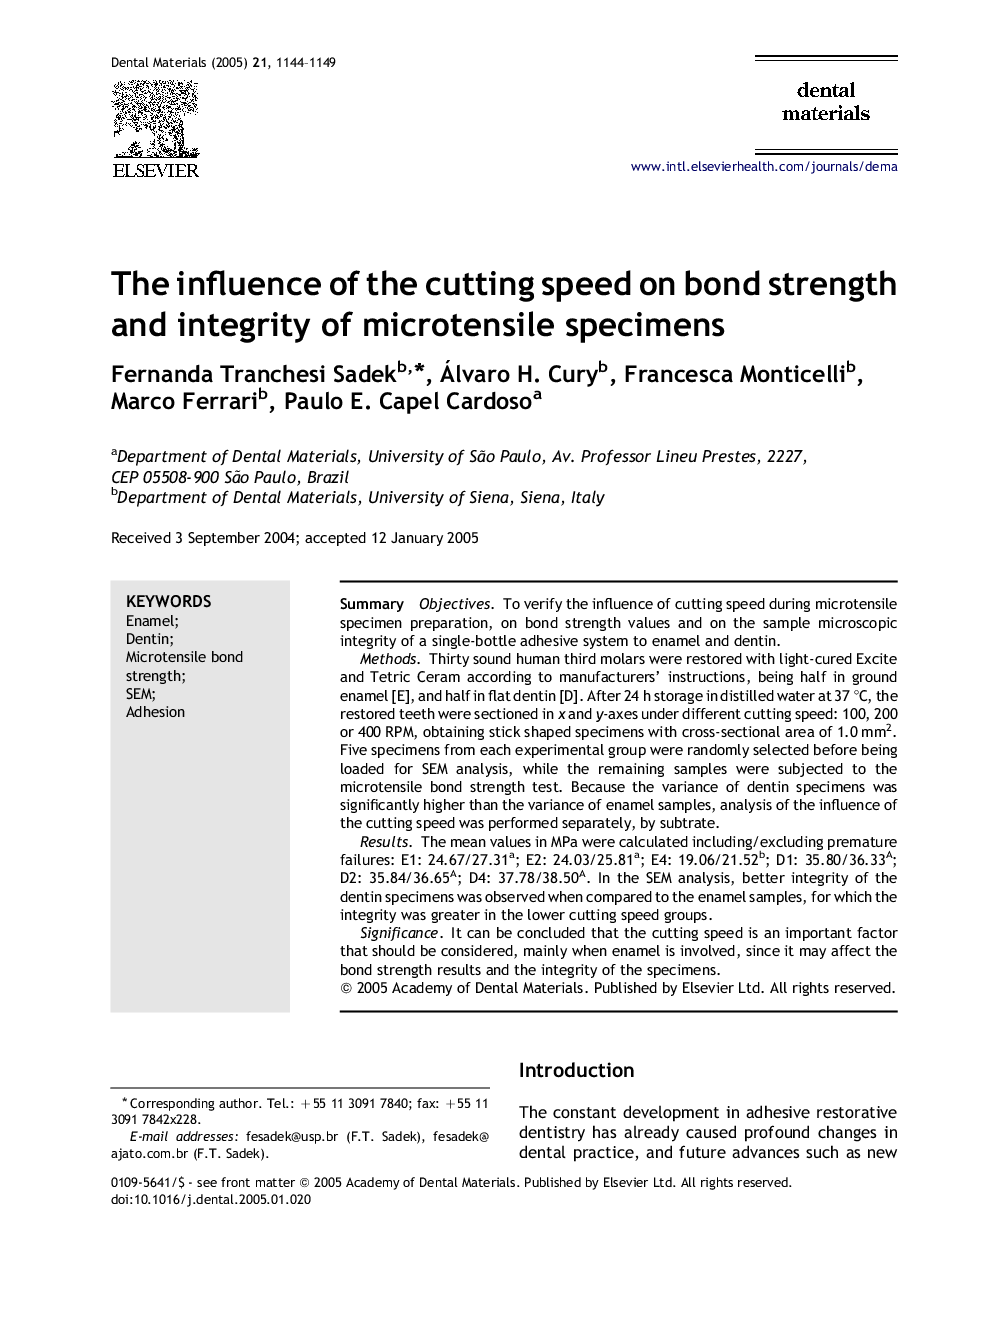 The influence of the cutting speed on bond strength and integrity of microtensile specimens